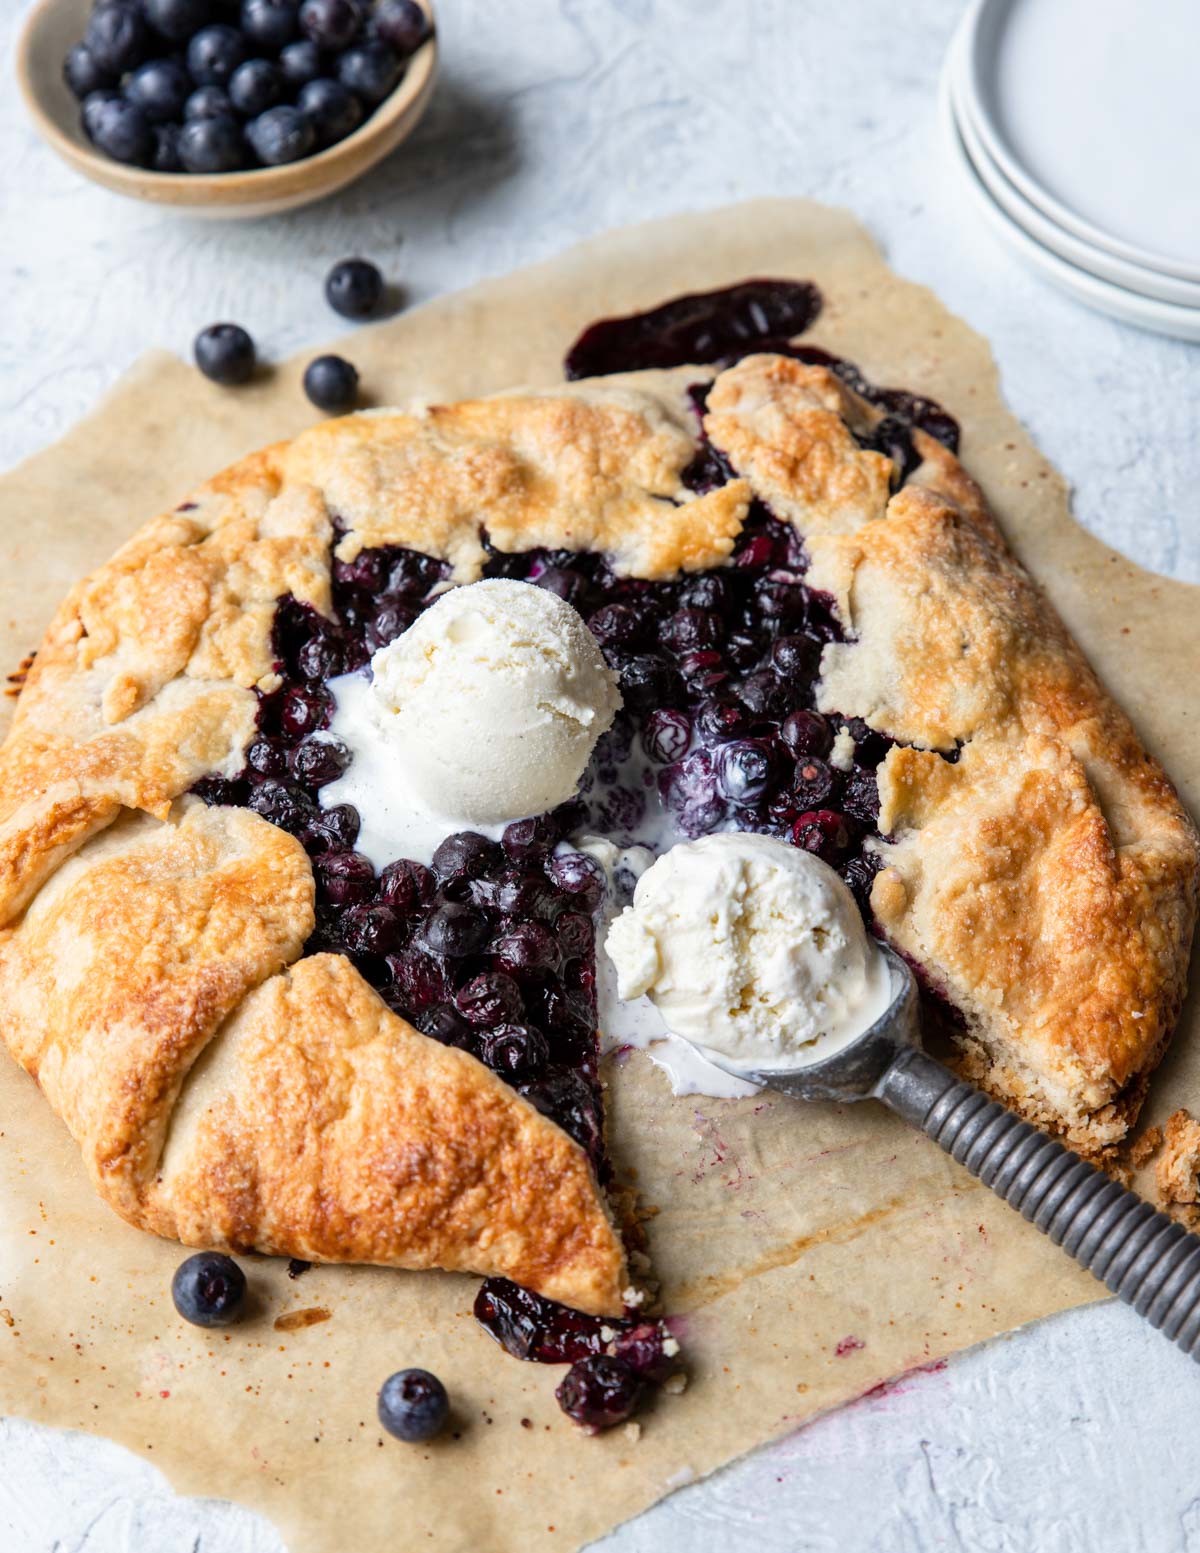 A blueberry galette on parchment paper with 2 scoops of ice cream